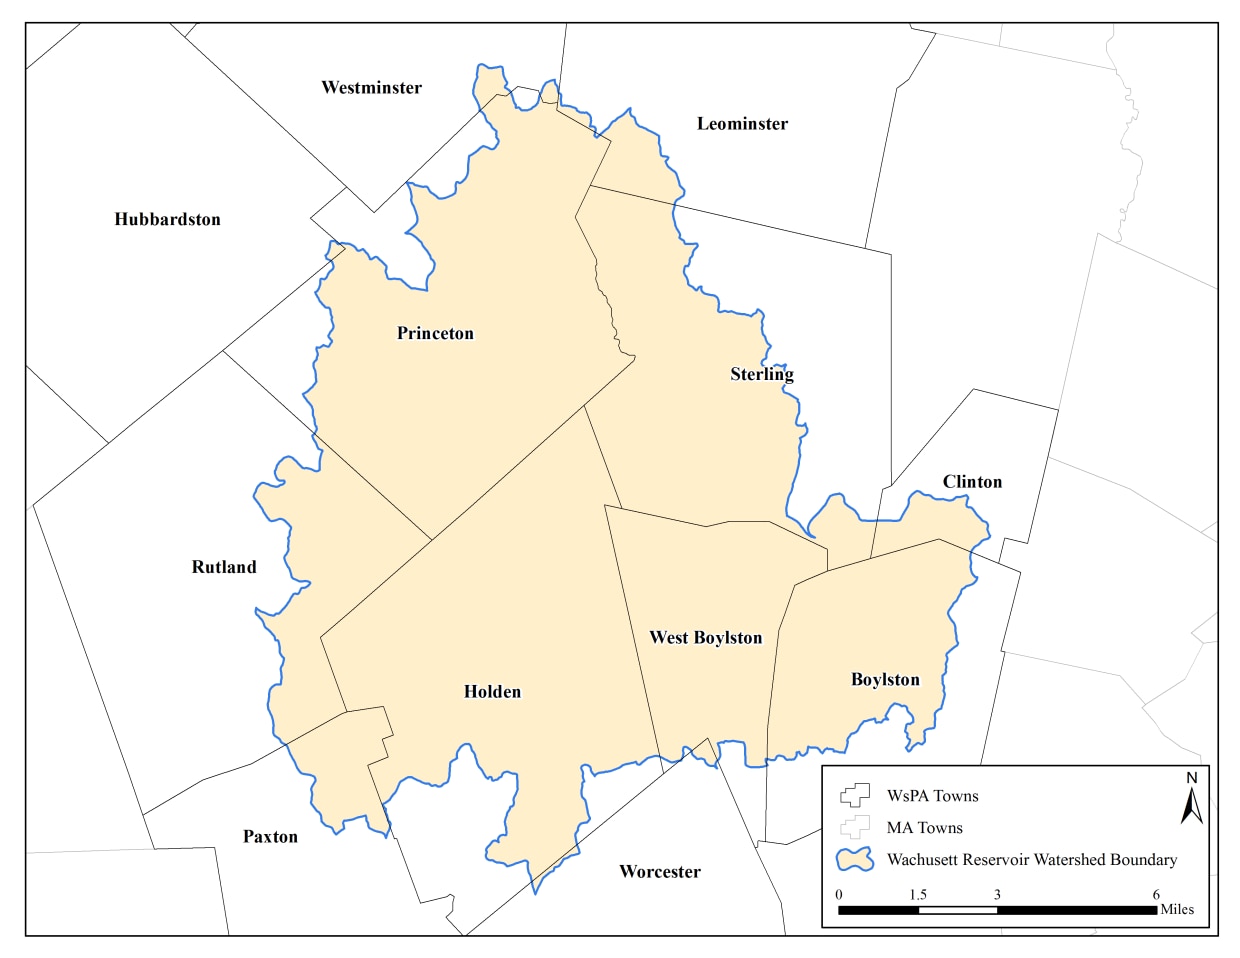 Towns affected by the Watershed Protection Act in the Wachusett Reservoir Watershed